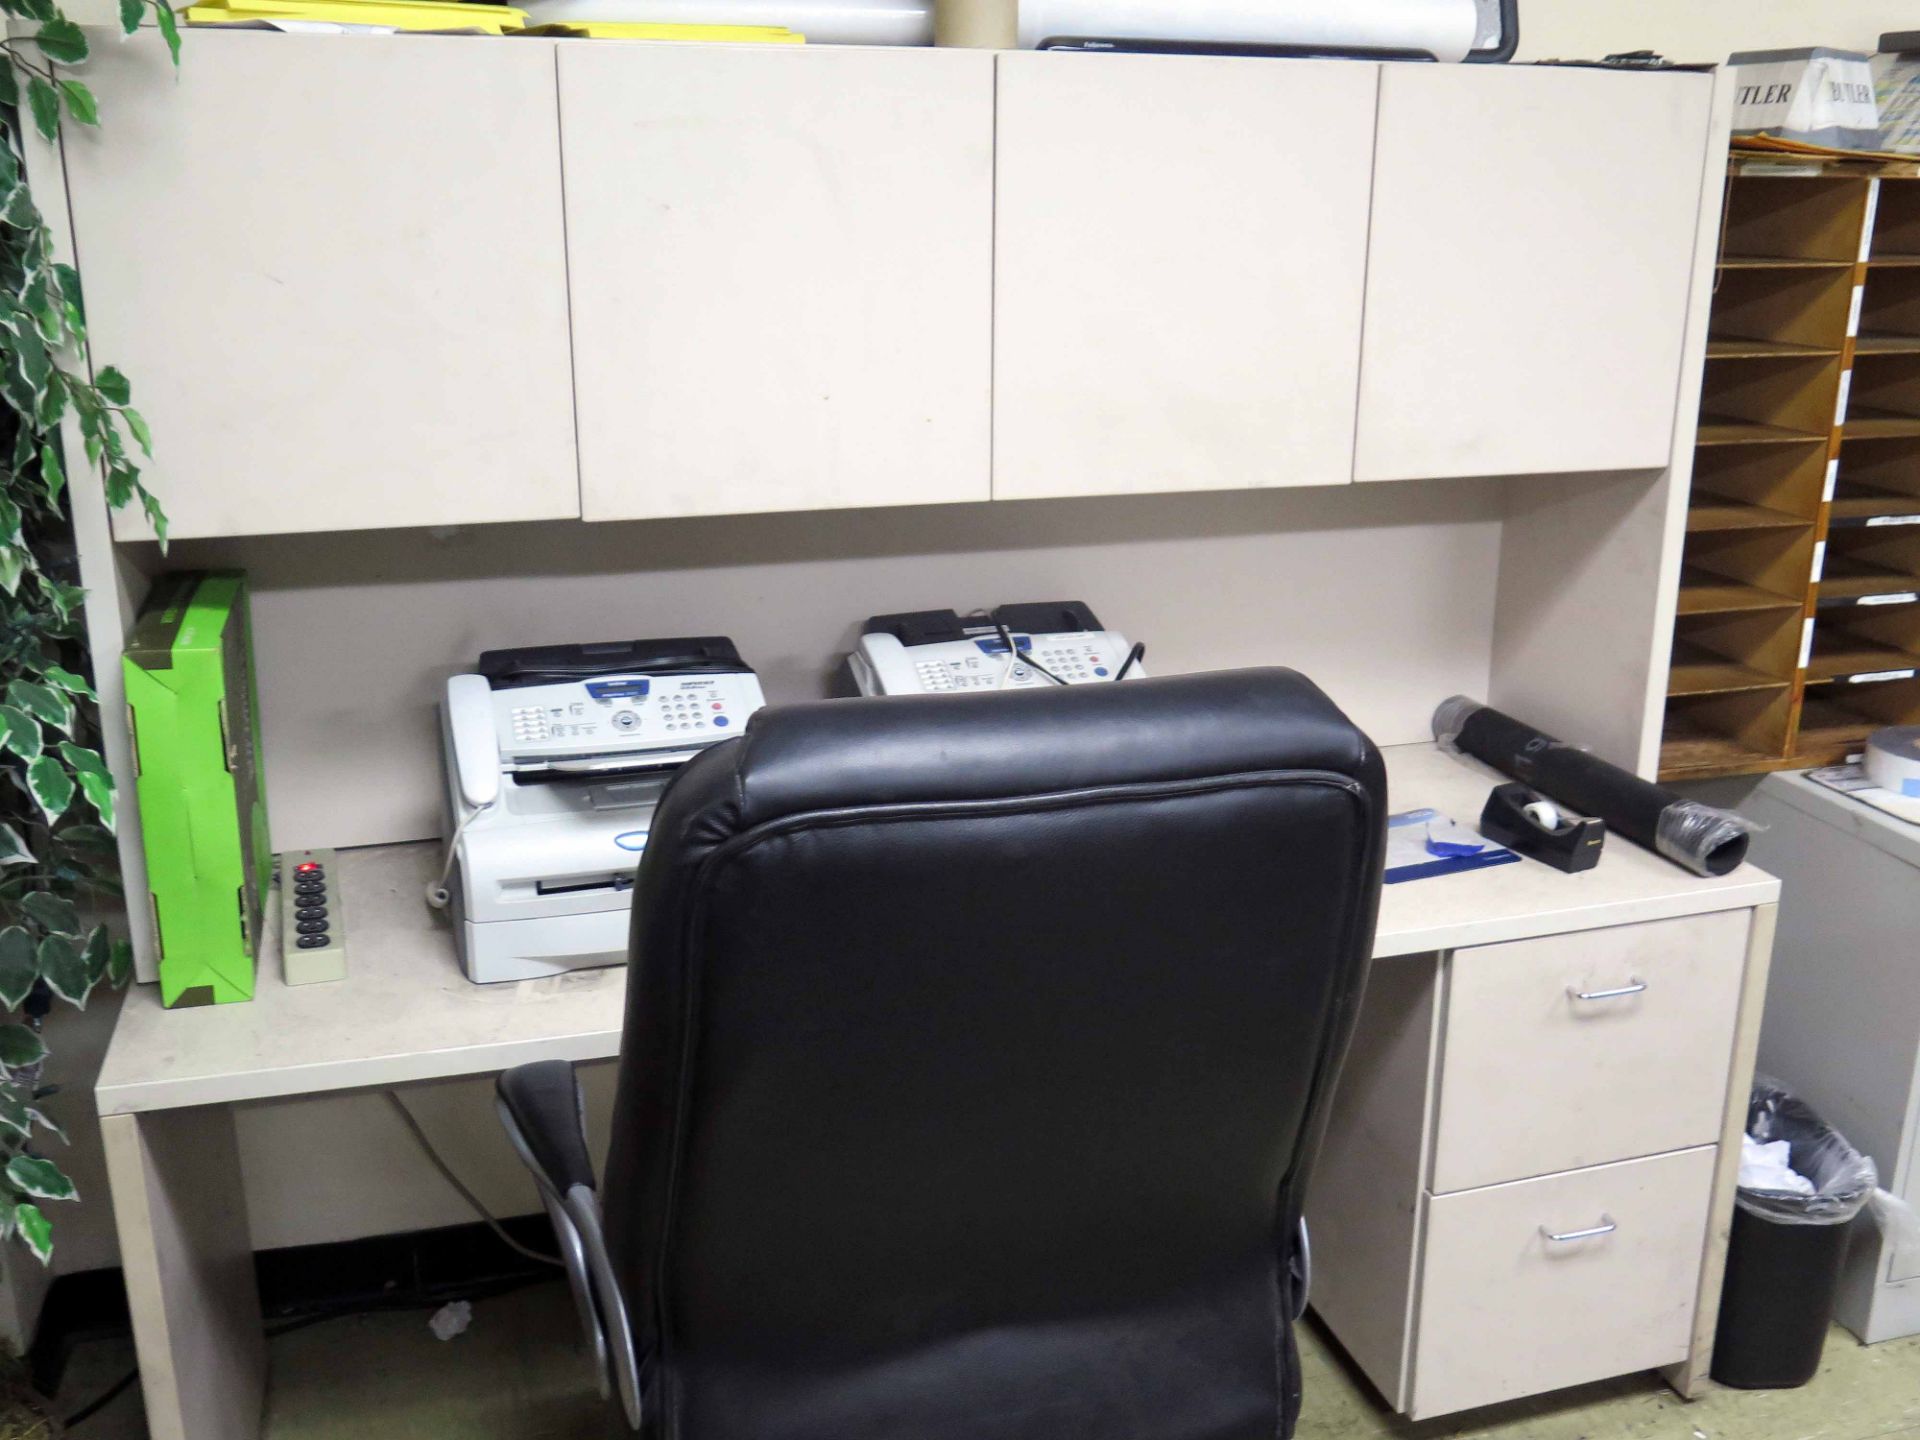 DISPATCH OFFICE, w/printers, filing cabinets, office furniture, metro rack - Image 7 of 16